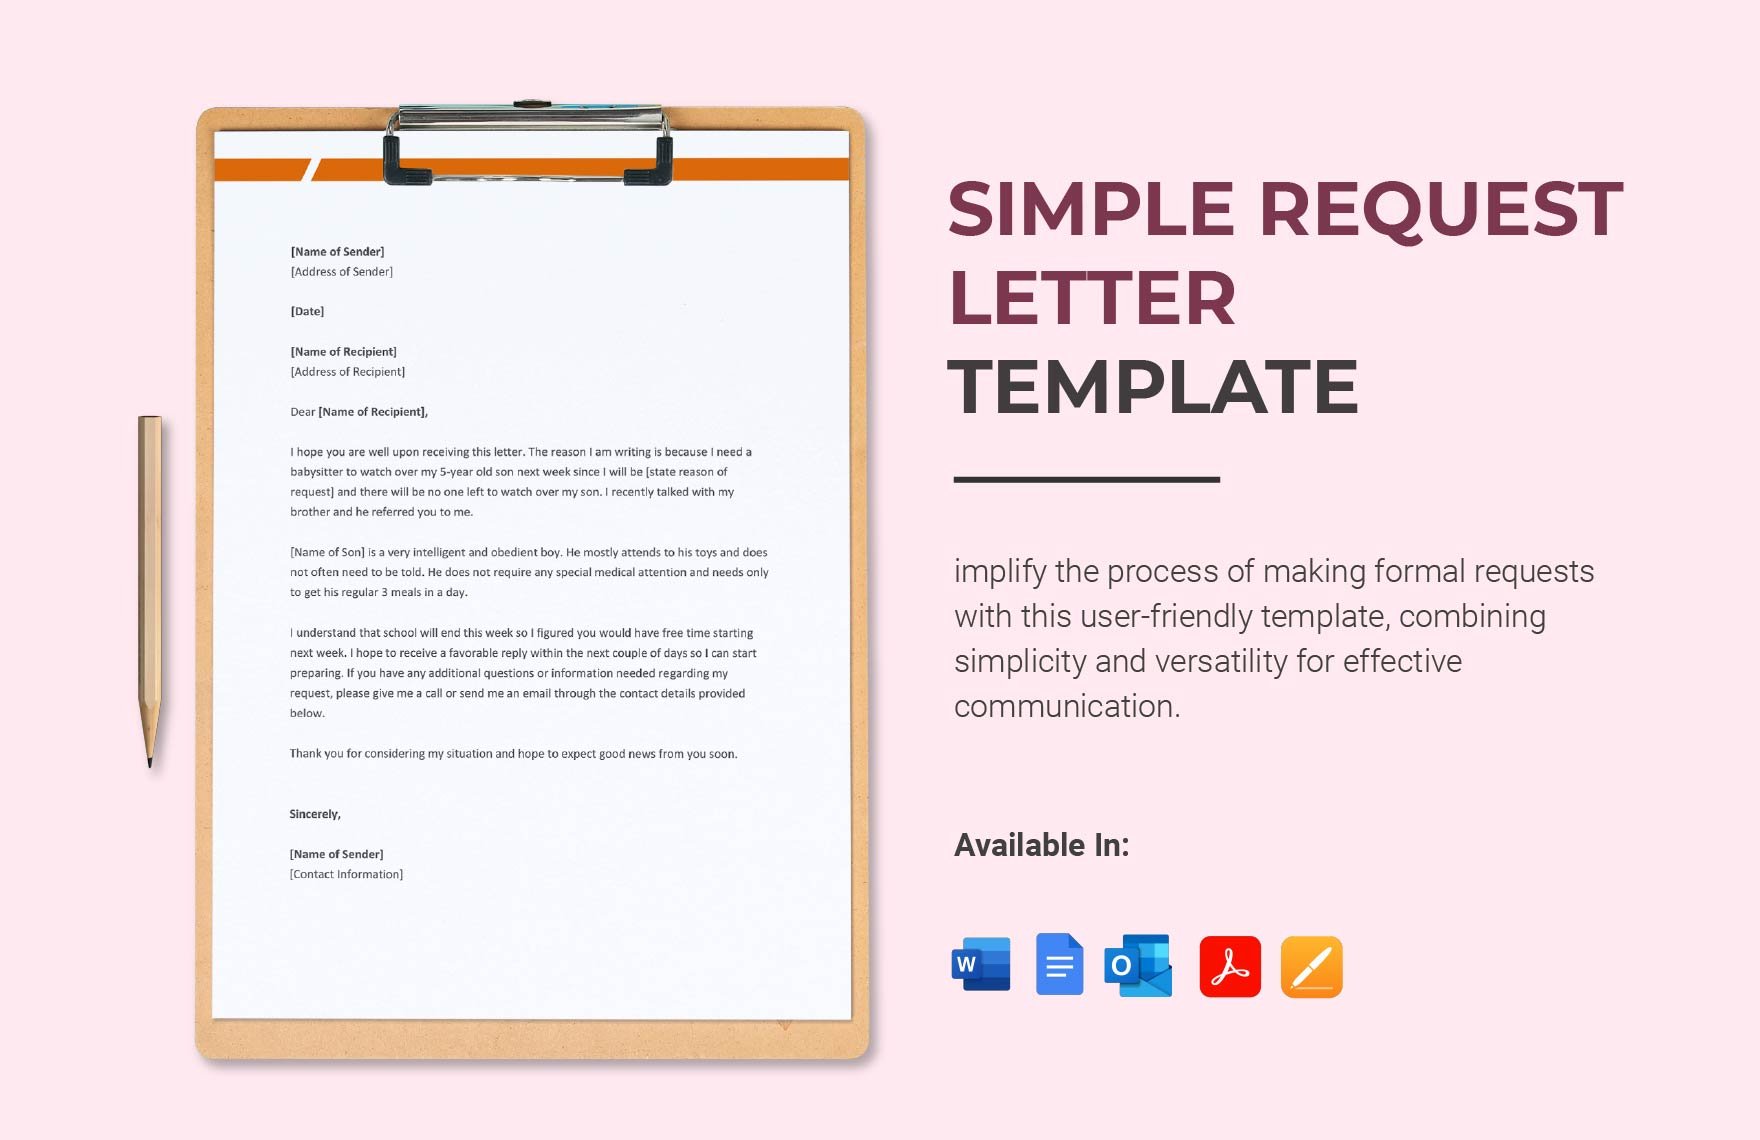 Simple Request Letter Template in Word, Google Docs, PDF, Apple Pages, Outlook